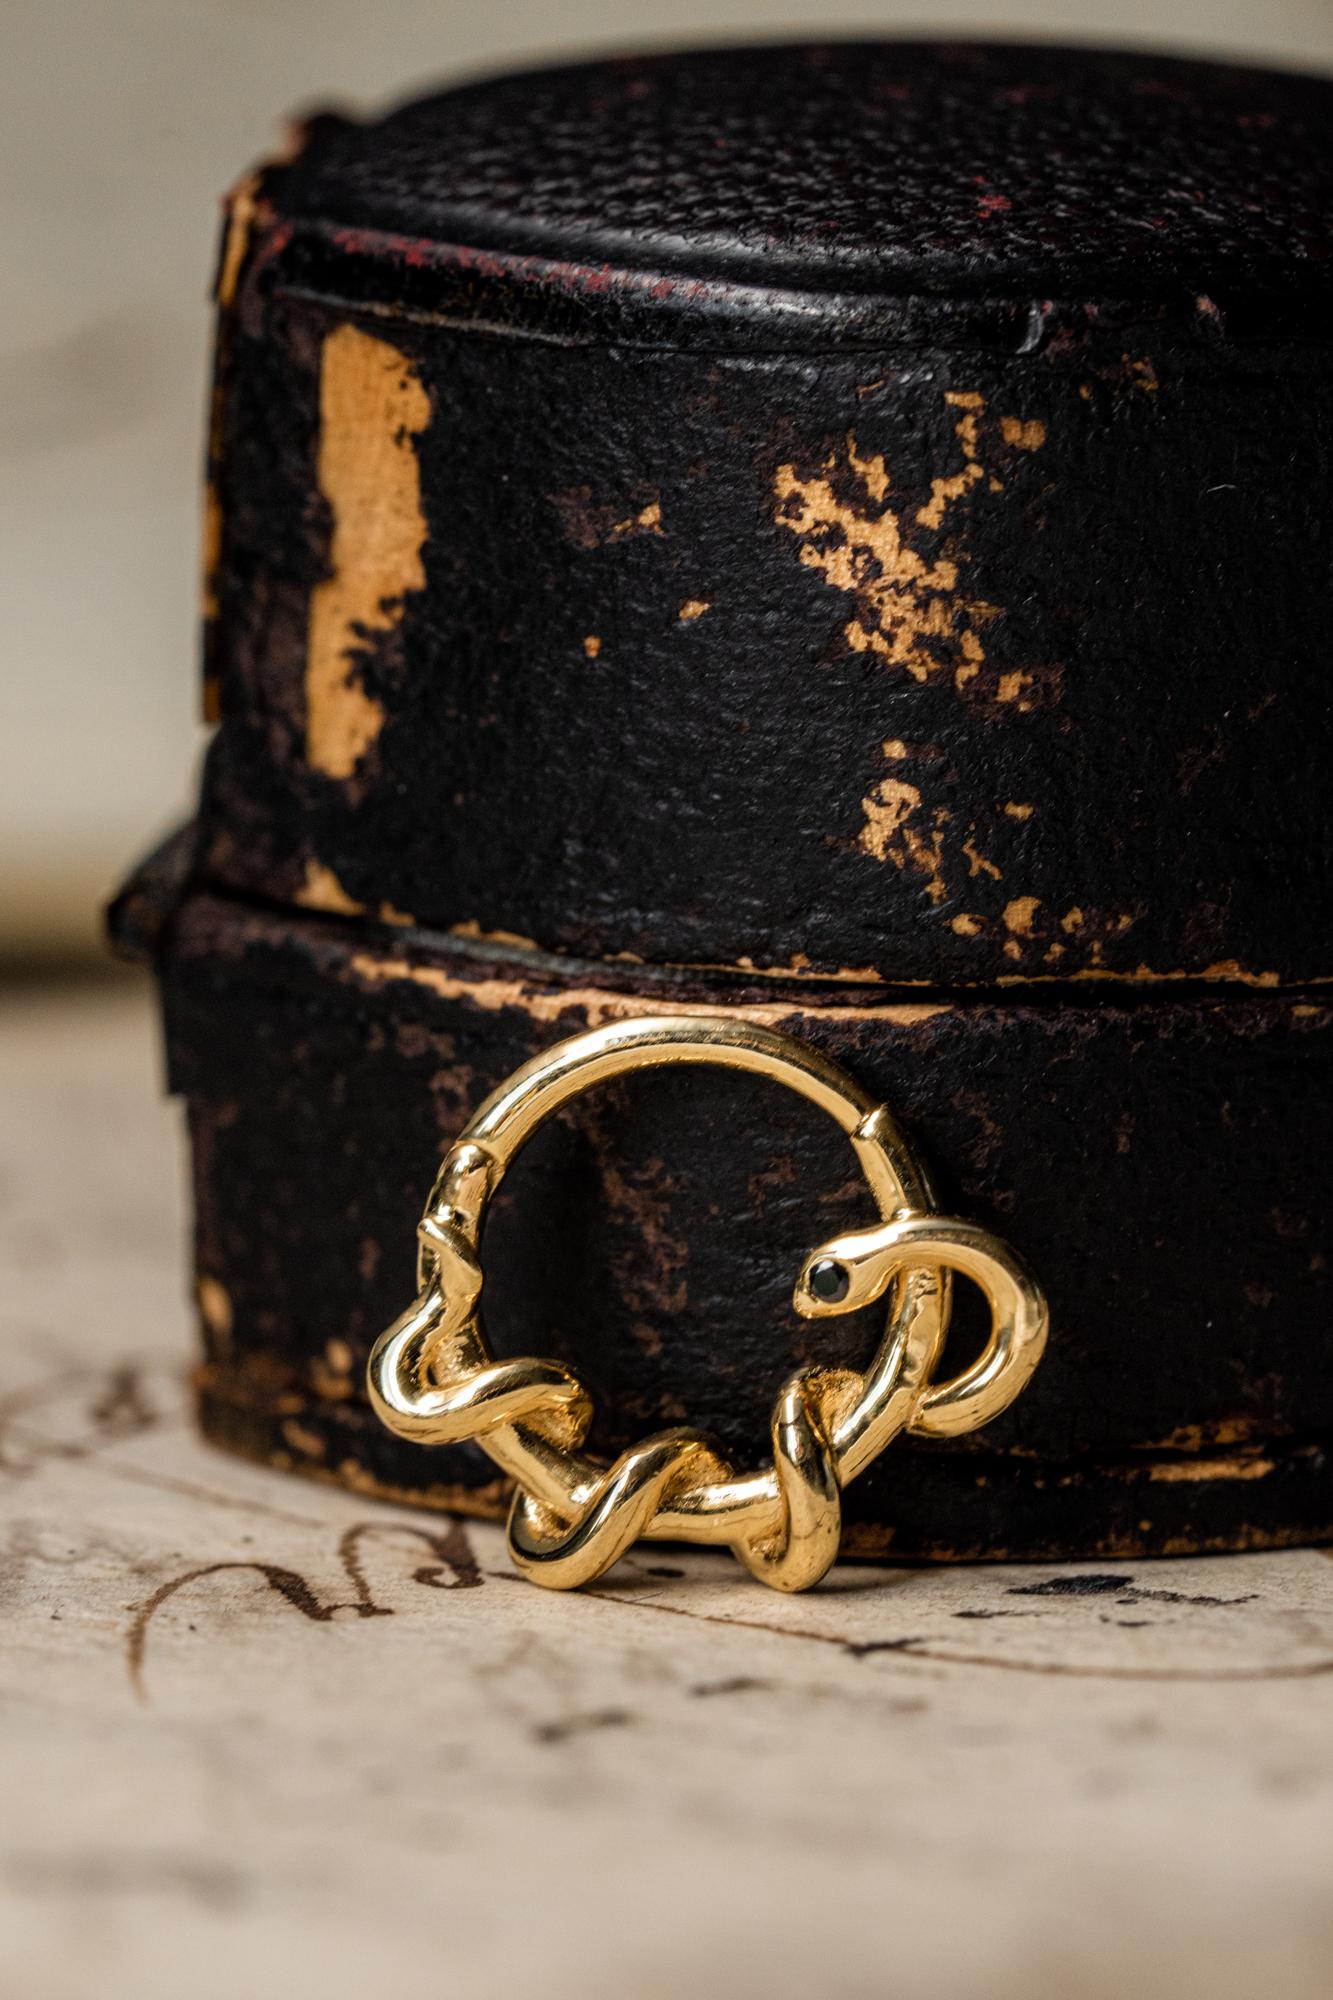 A pair of black diamond snake earrings in solid 14k yellow gold. The earrings are set with 0.02 CT black diamond each with a total weight of 0.04 CT.
Can also be worn as a nose or ear piercing. If you would like to order a single earring, please